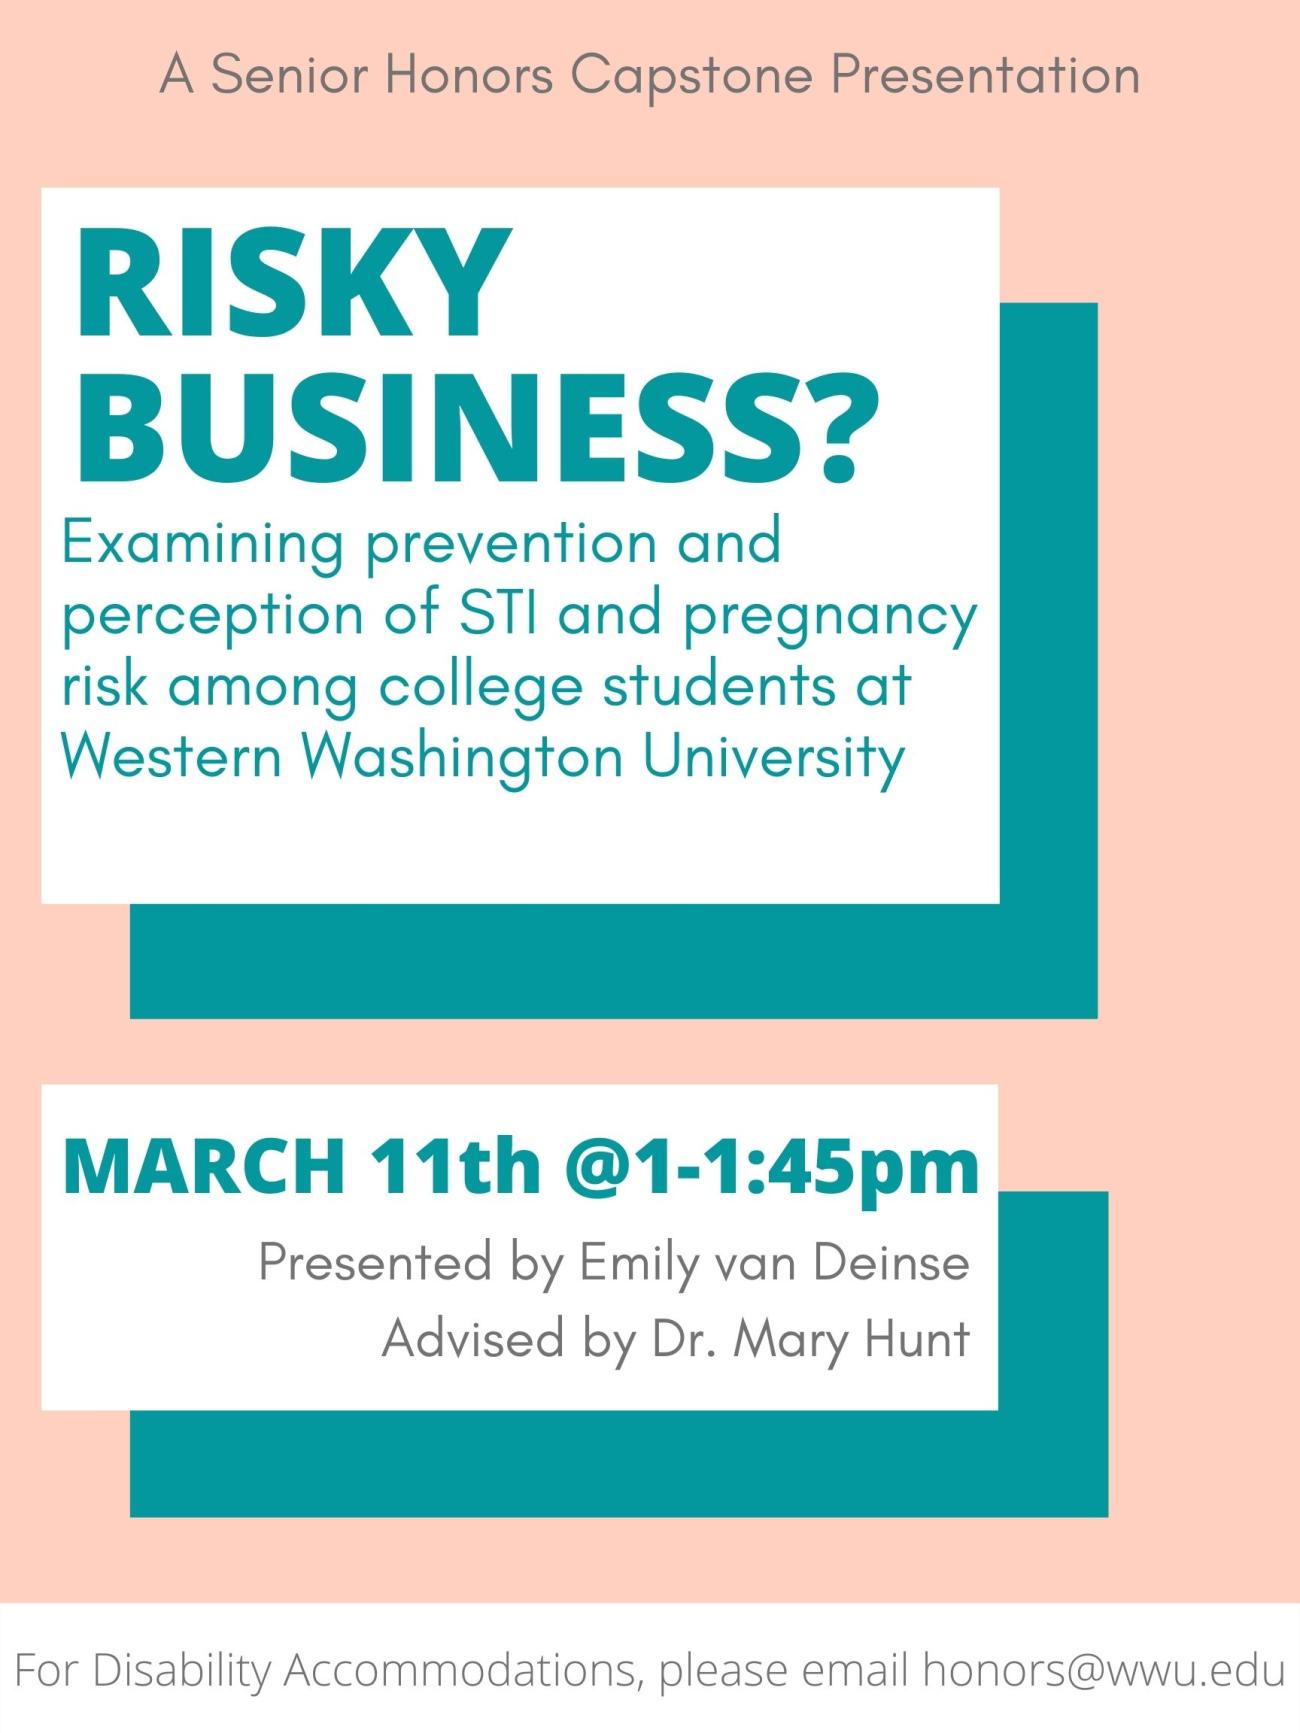 White and teal rectangle graphics on a light pink background. Text reads: "Risky Business? Examining prevention and perception of STI and pregnancy risk among college students at Western Washington University. March 11th @1-1:45pm. Presented by Emily van Deinse. Advised by Dr. Mary Hunt. For Disability Accommodations please email honors@wwu.edu"